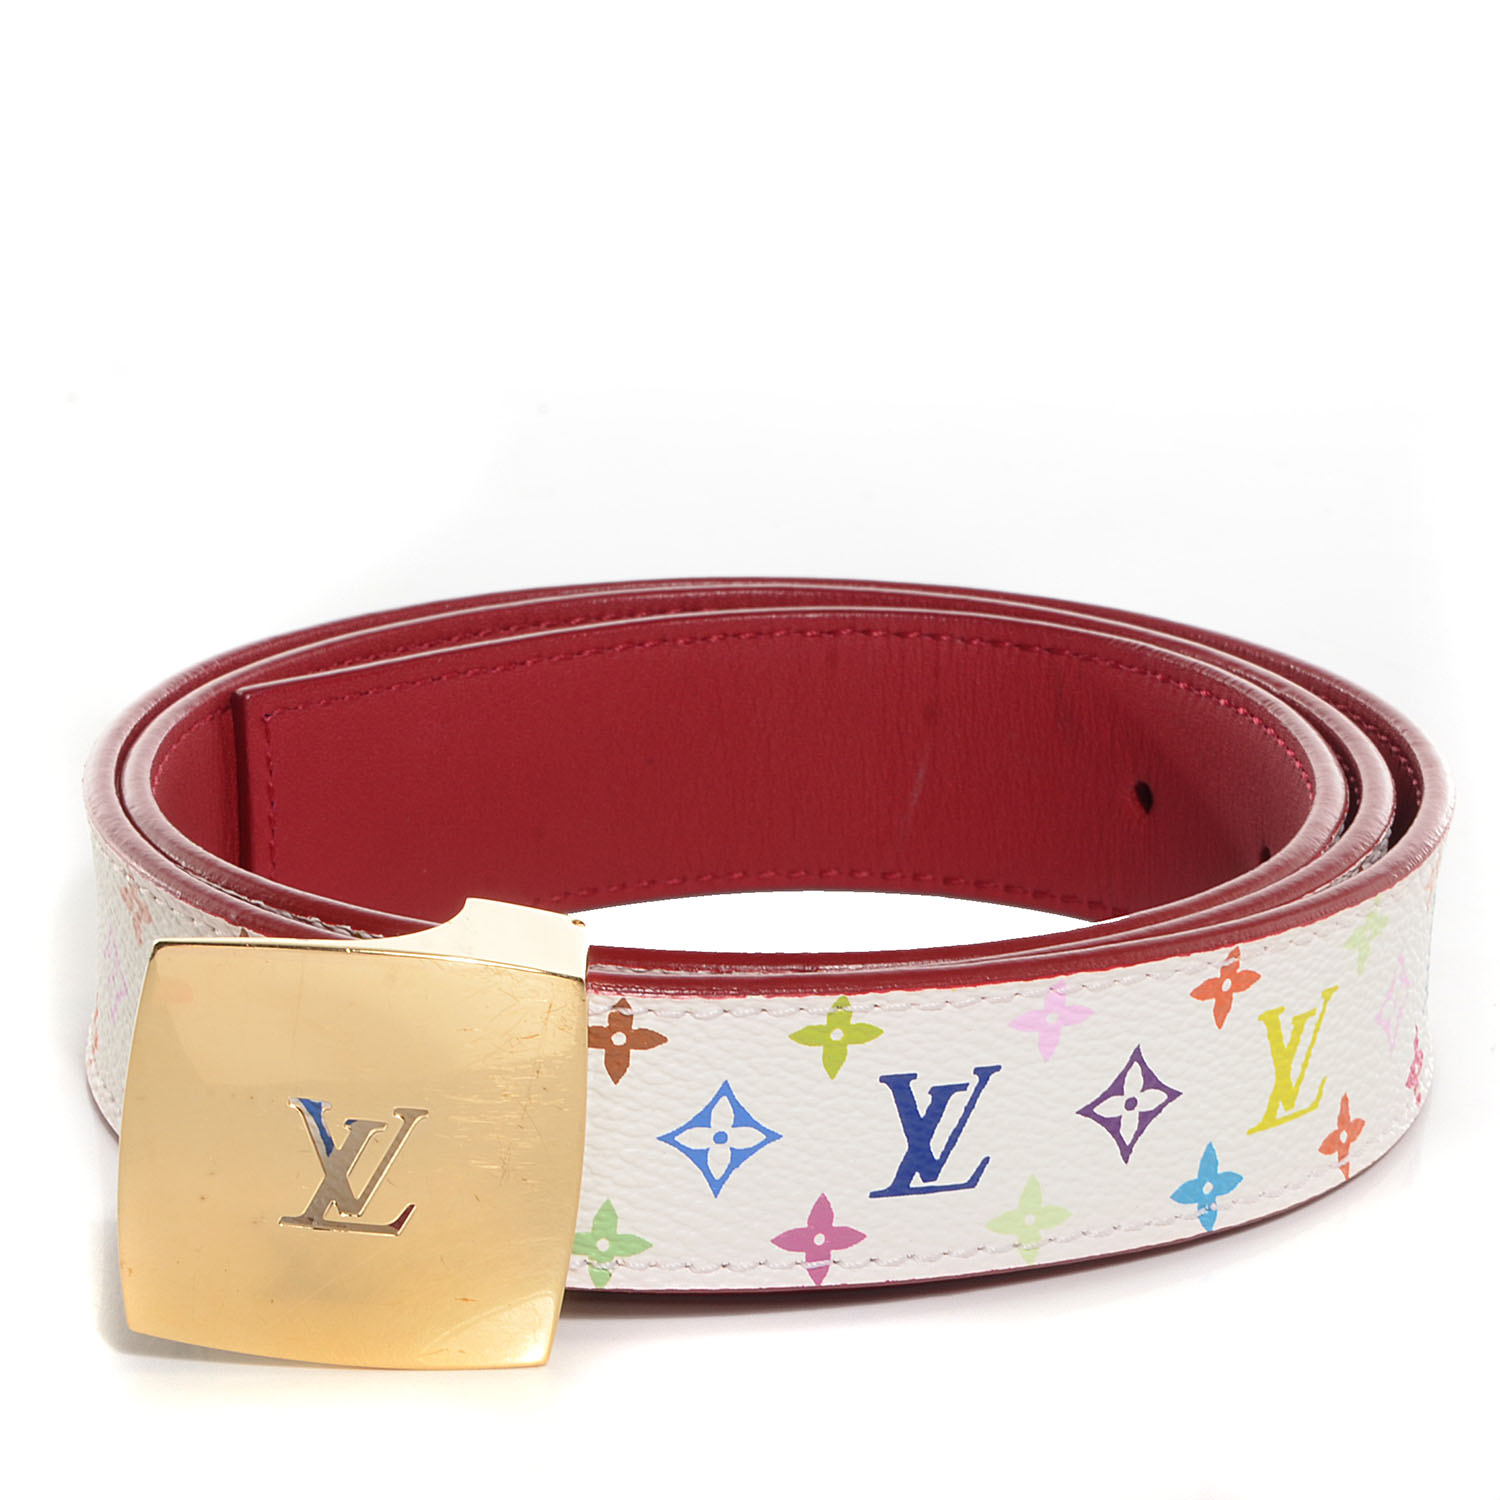 How To Style A Louis Vuitton Belt | Natural Resource Department